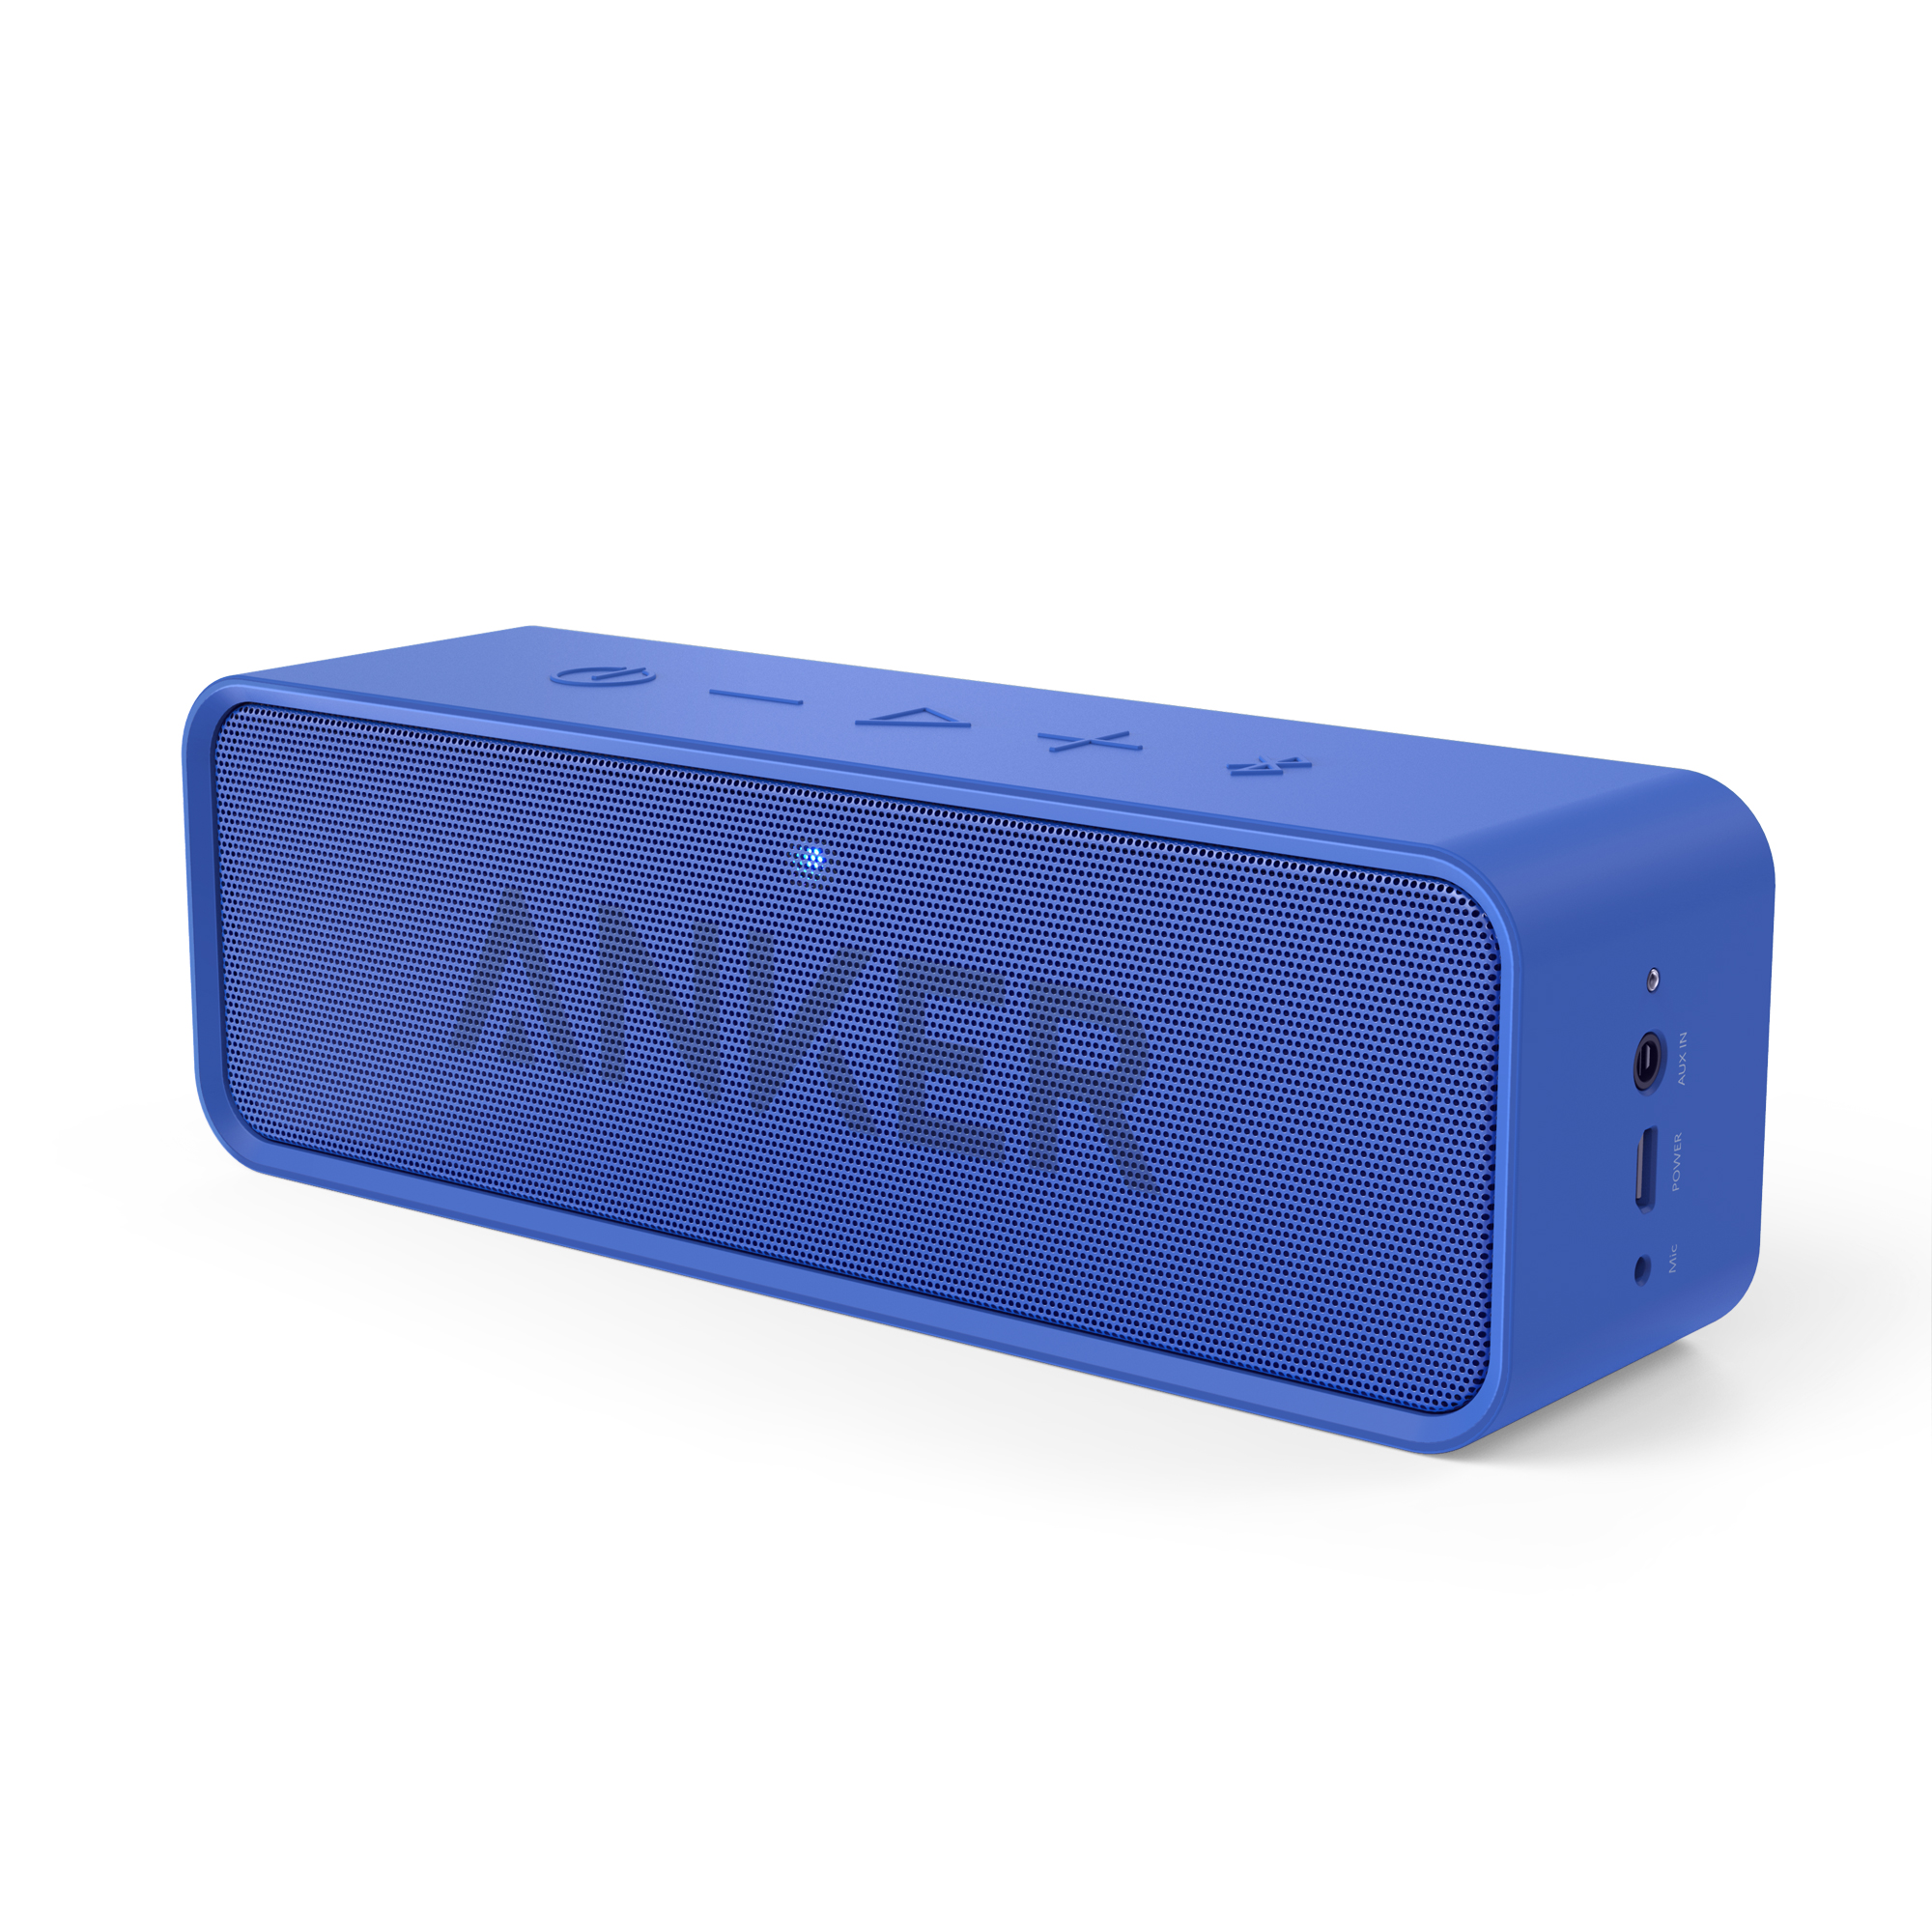 Anker Soundcore Bluetooth Speaker with 24-Hour Playtime, 66-Feet Bluetooth Range & Built-in Mic, Dual-Driver Portable Wireless Speaker with Low Harmonic Distortion and Superior Sound - Blue Blue Speaker - image 1 of 4